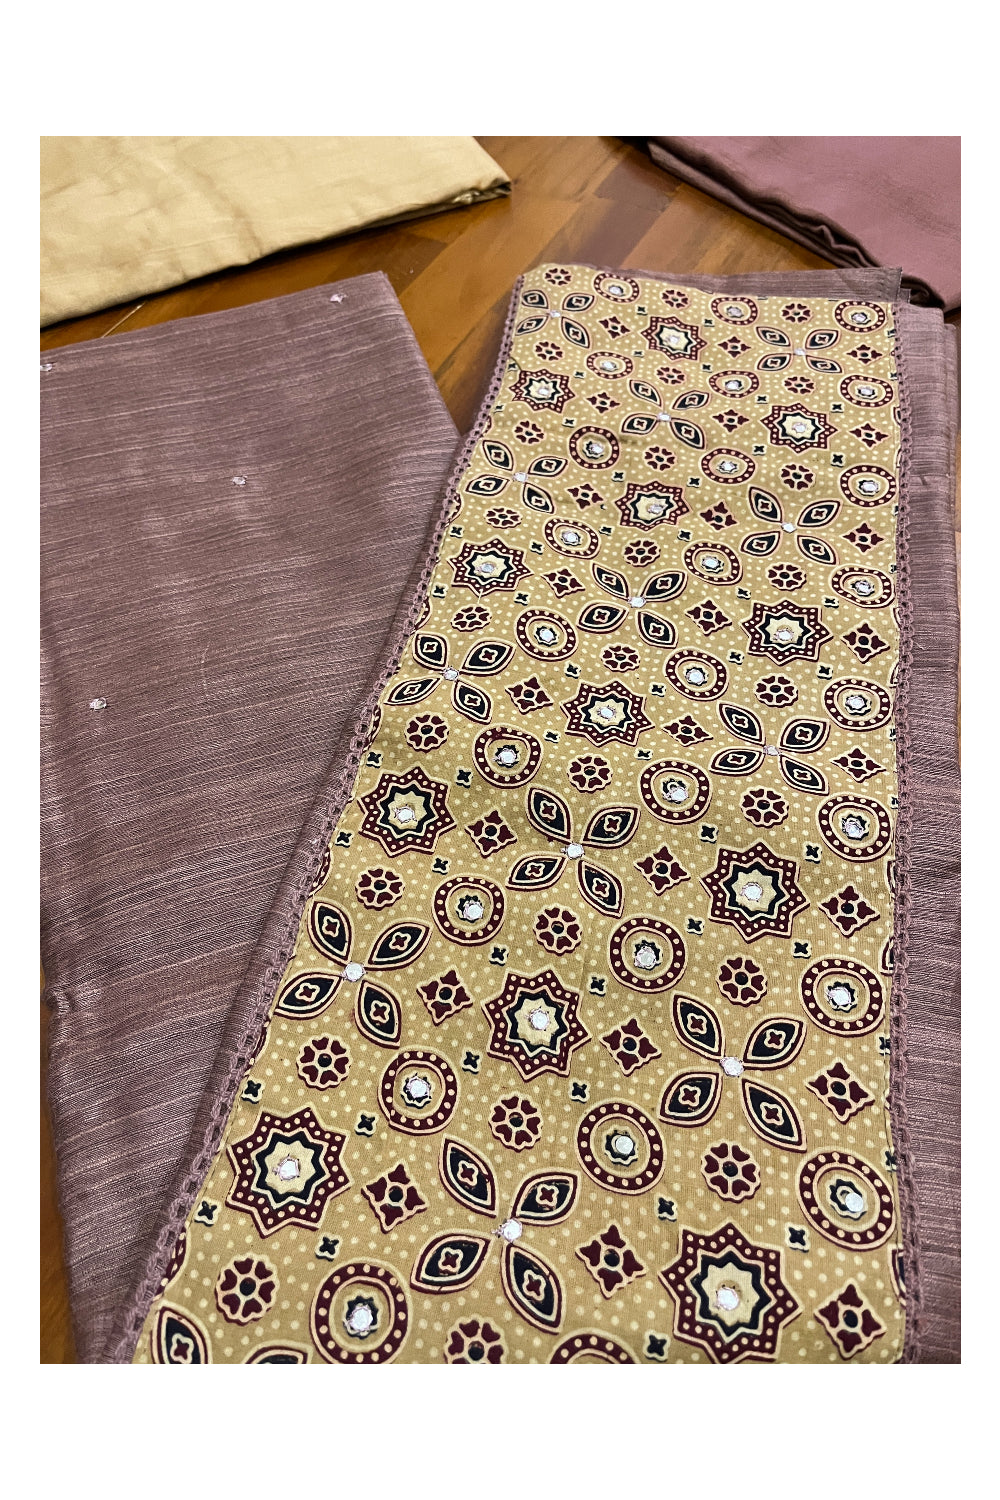 Southloom™ Cotton Churidar Salwar Suit Material in Brown with Maroon Prints